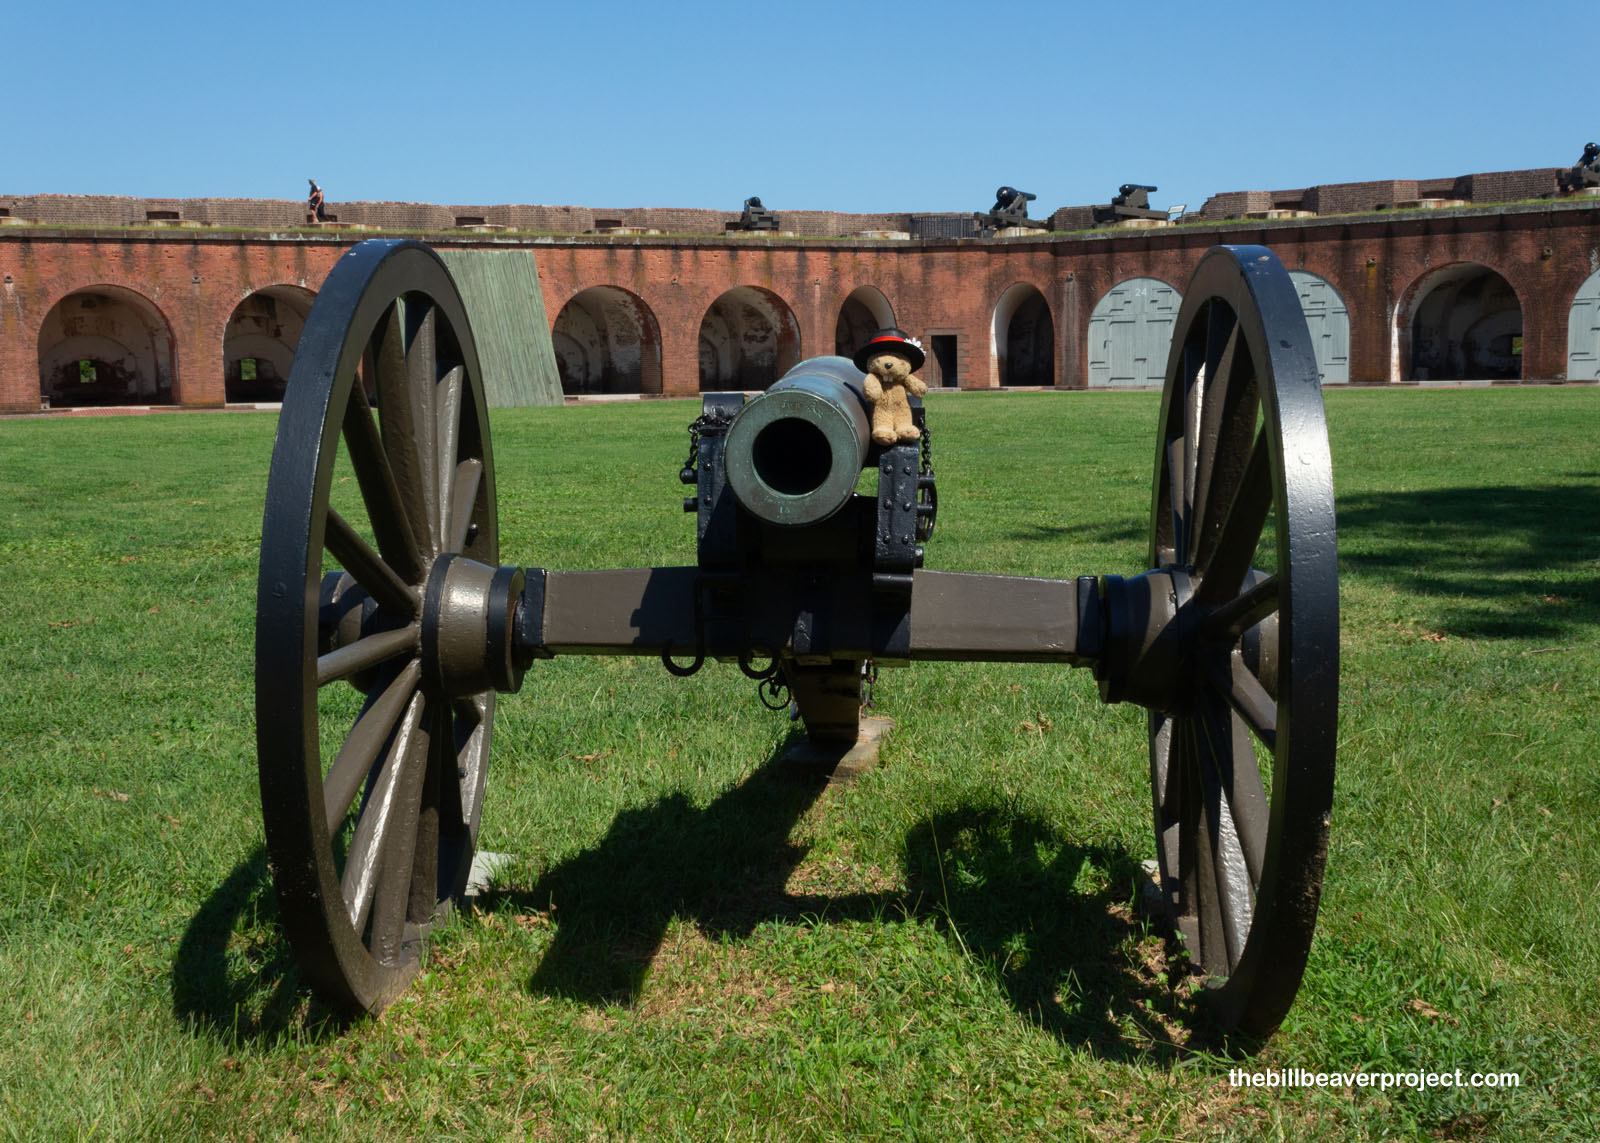 A cannon inside the fort!